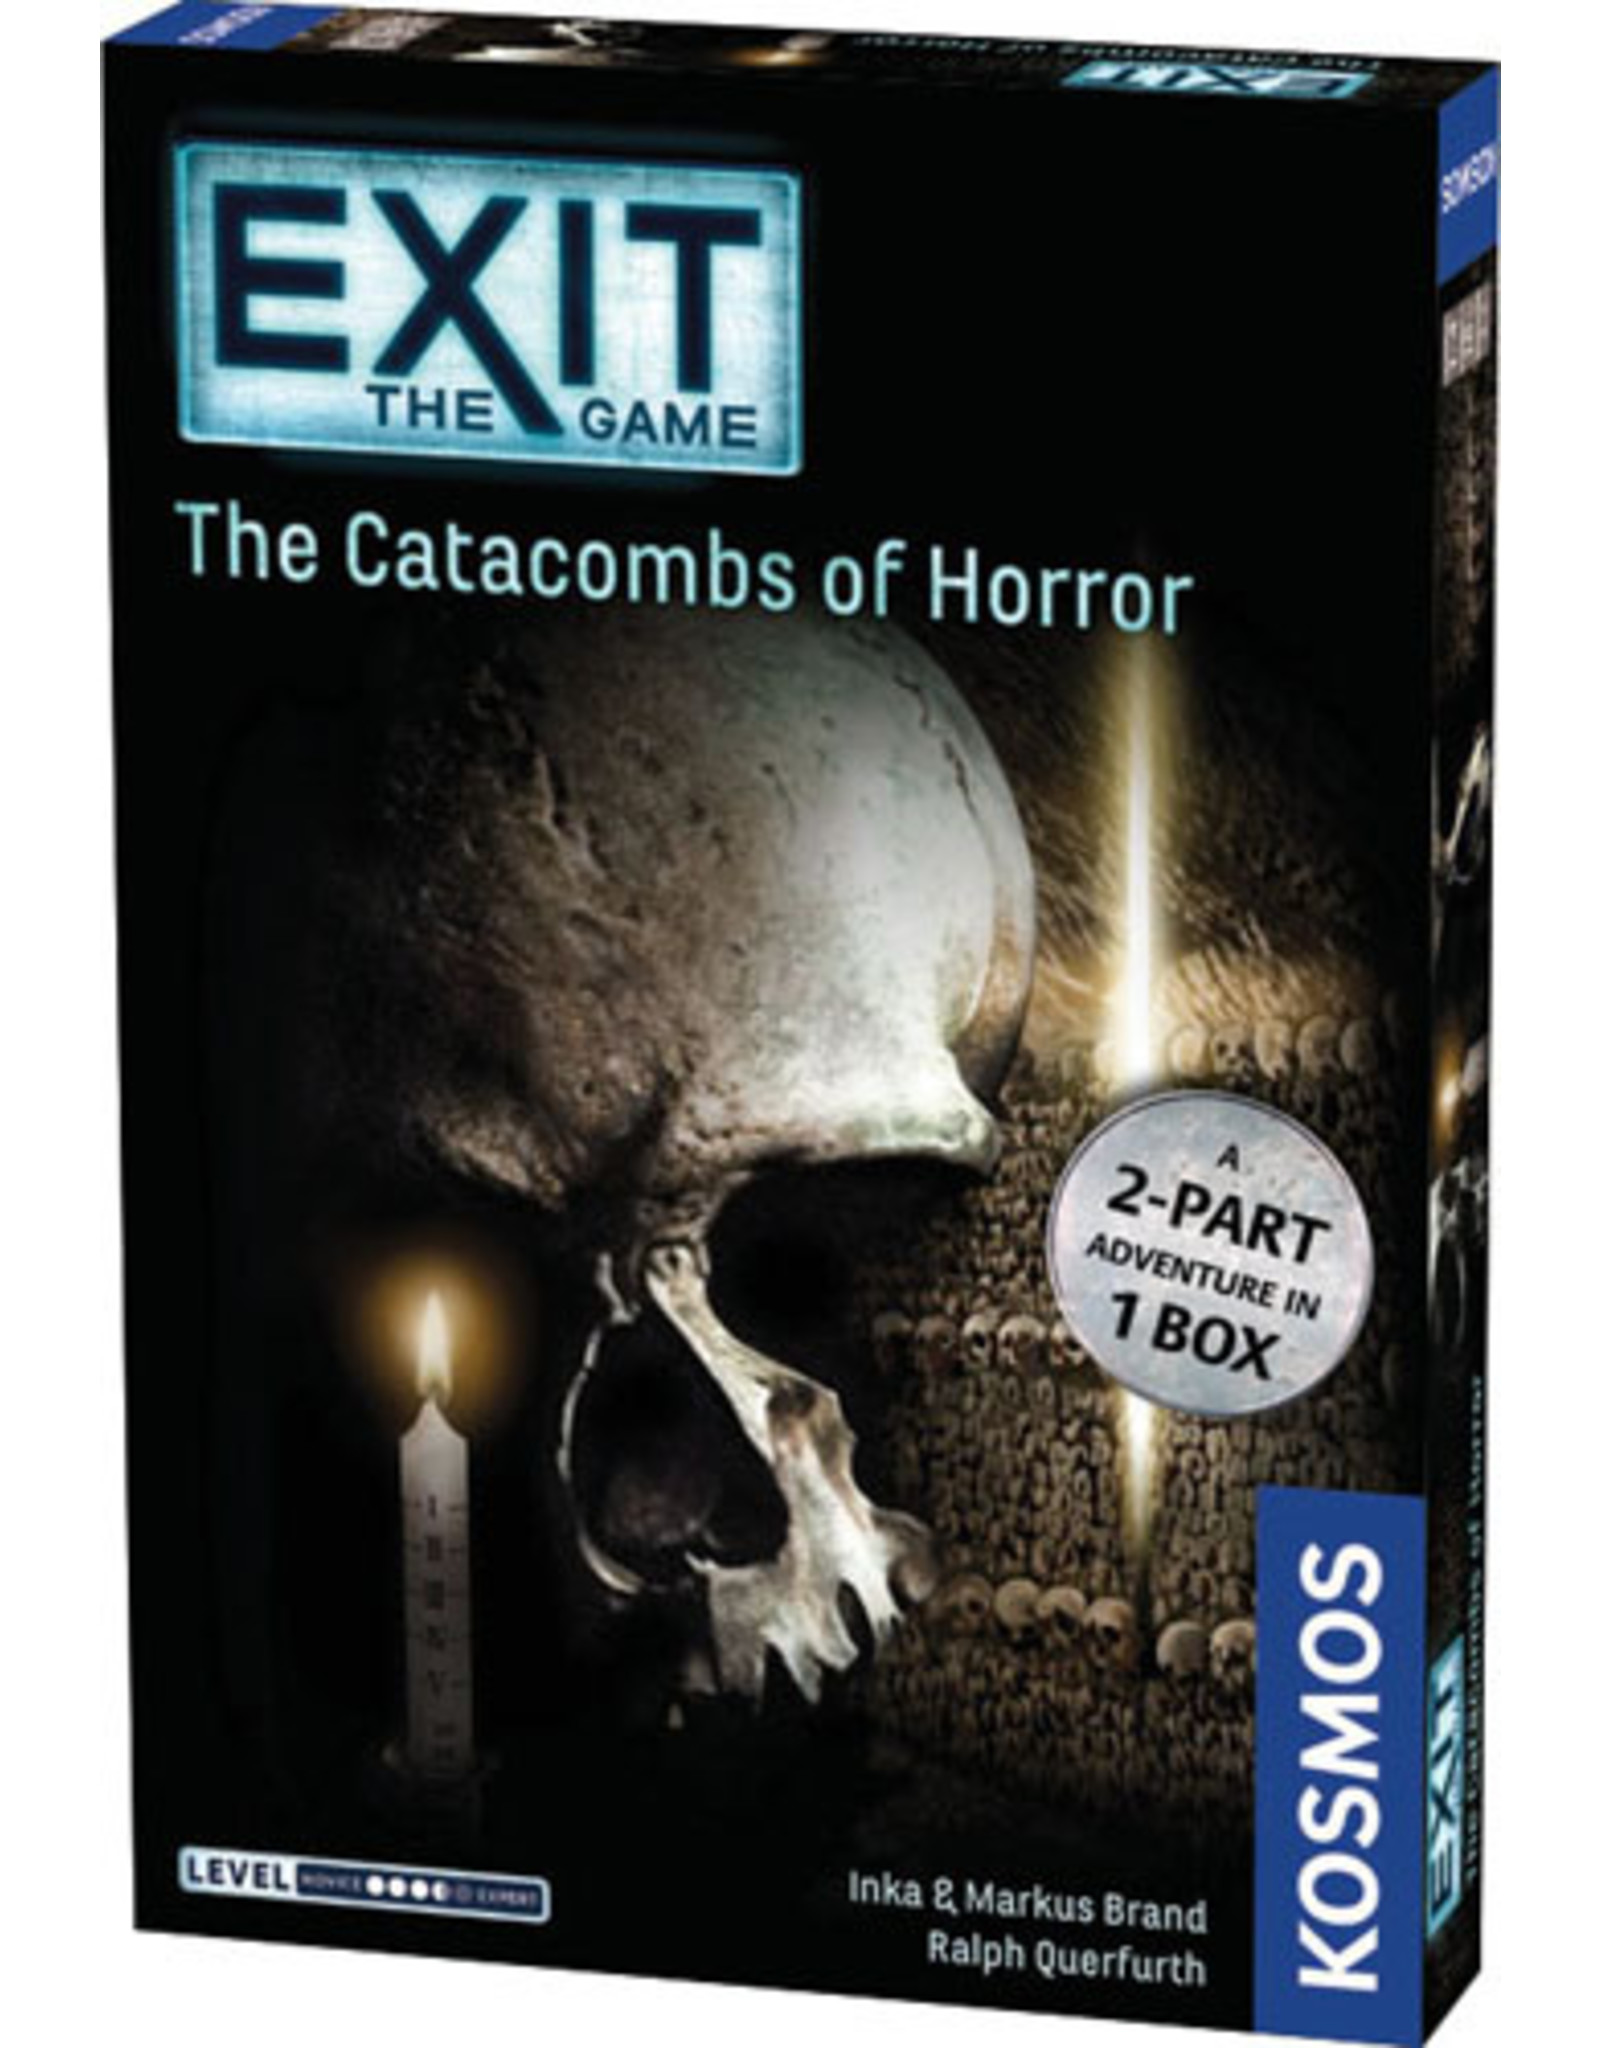 Exit EXIT Catacombs of Horror